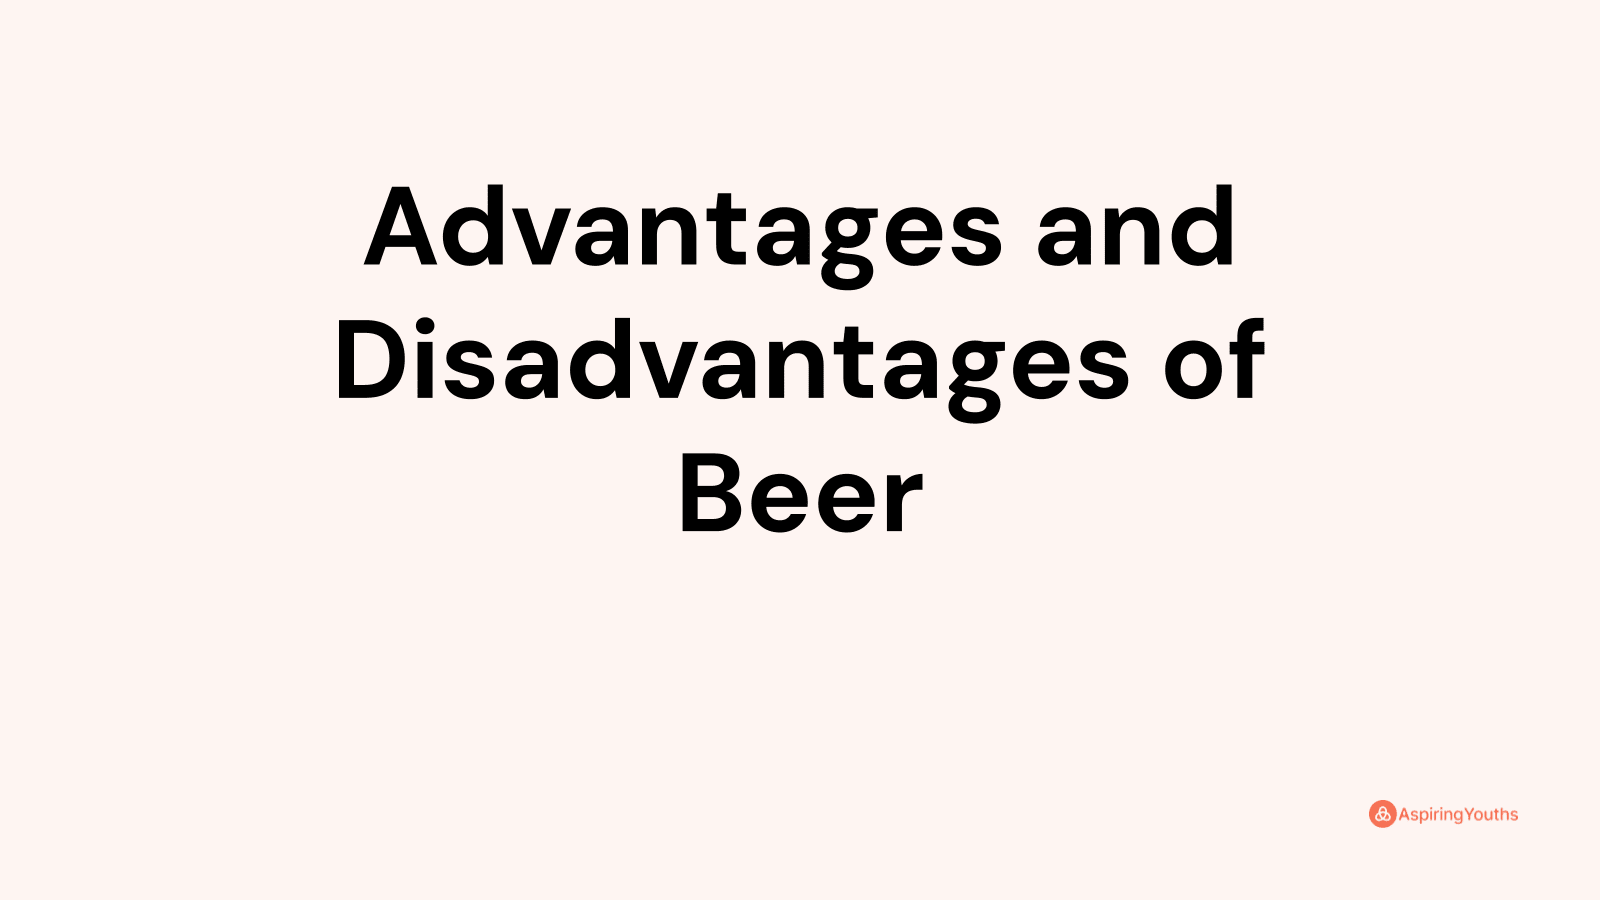 Advantages and disadvantages of Beer